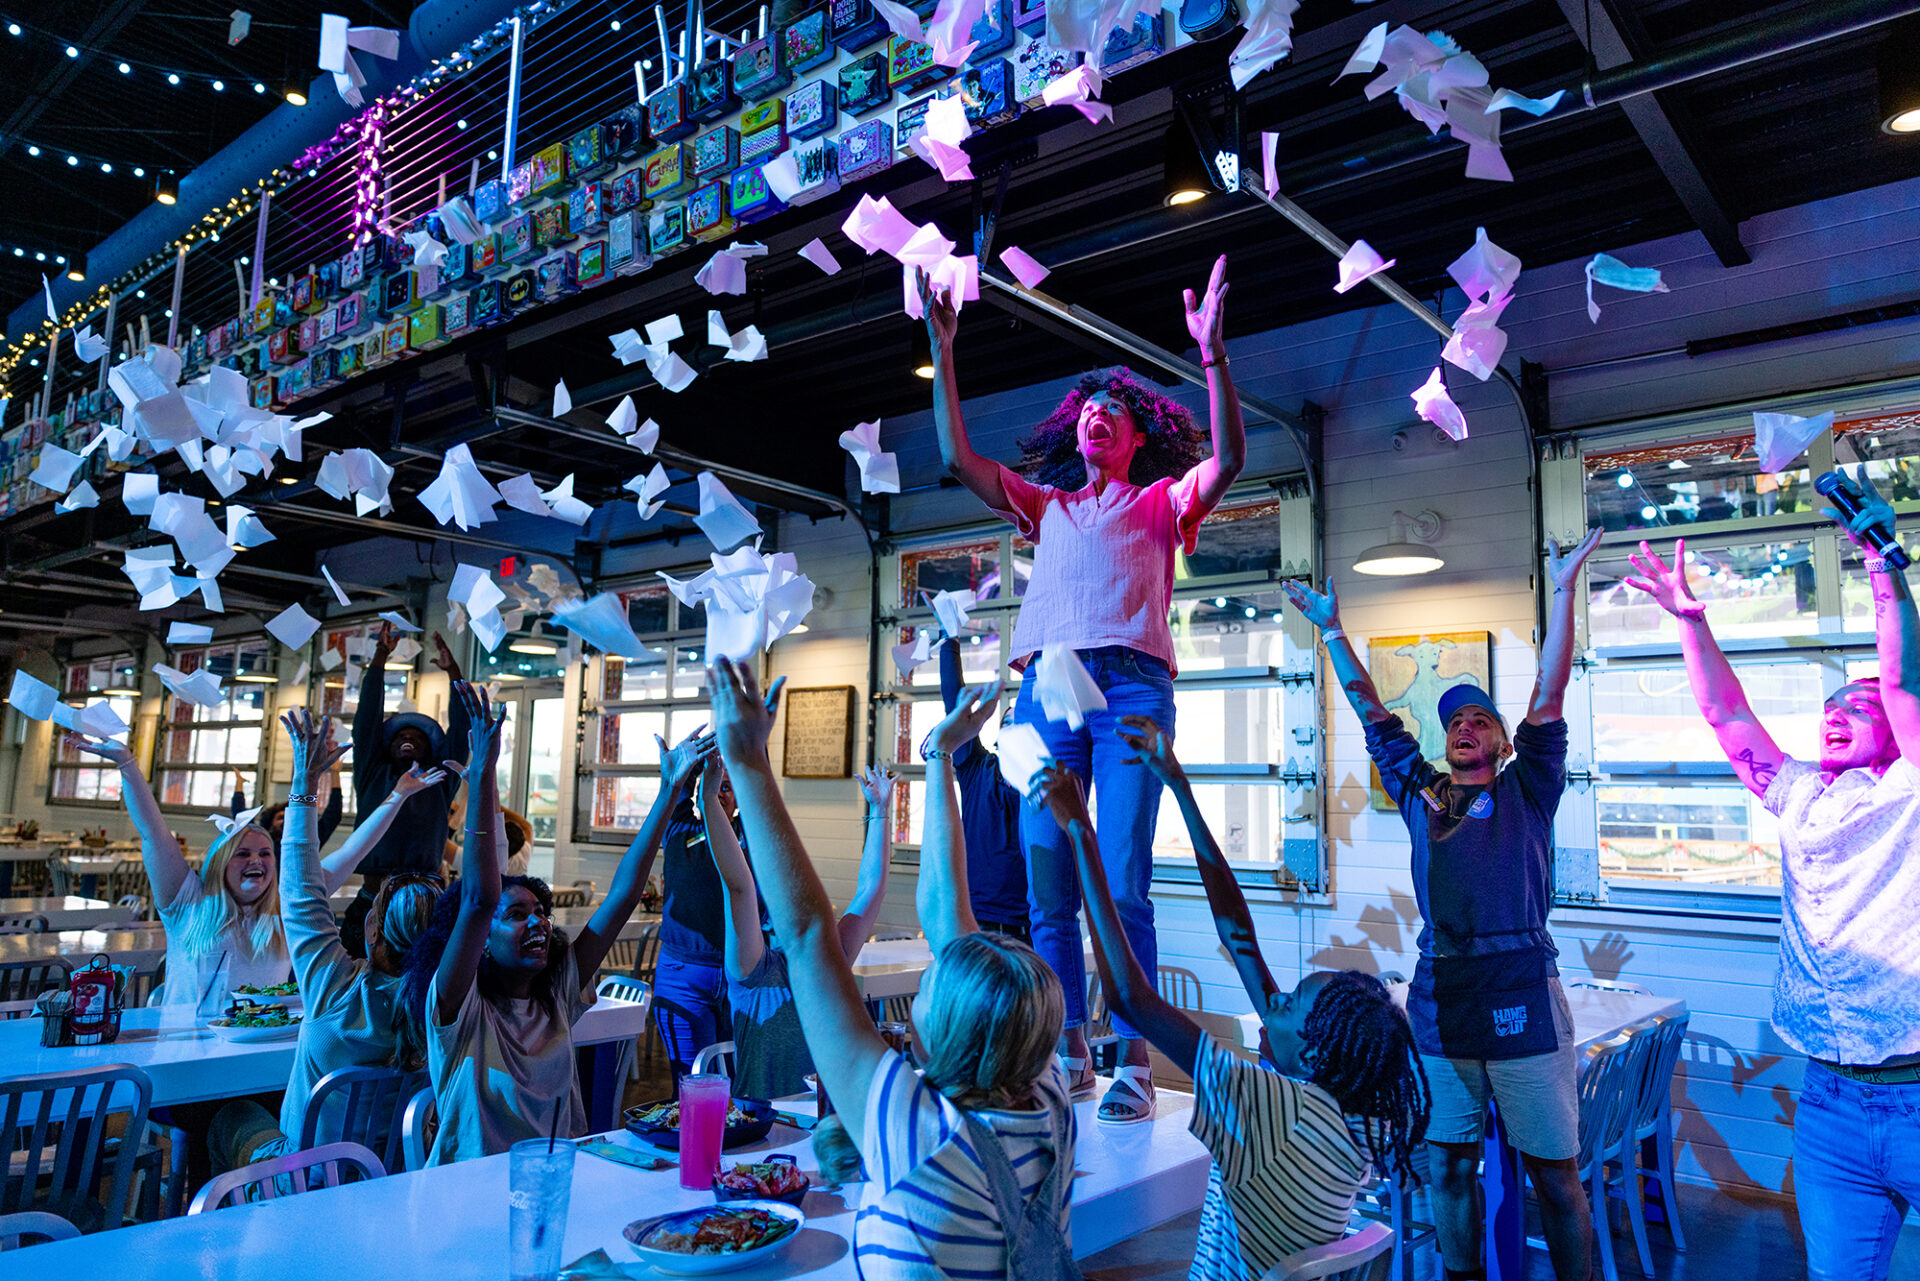 People throwing napkins in the air in celebration at a restaurant in Myrtle Beach, South Carolina.